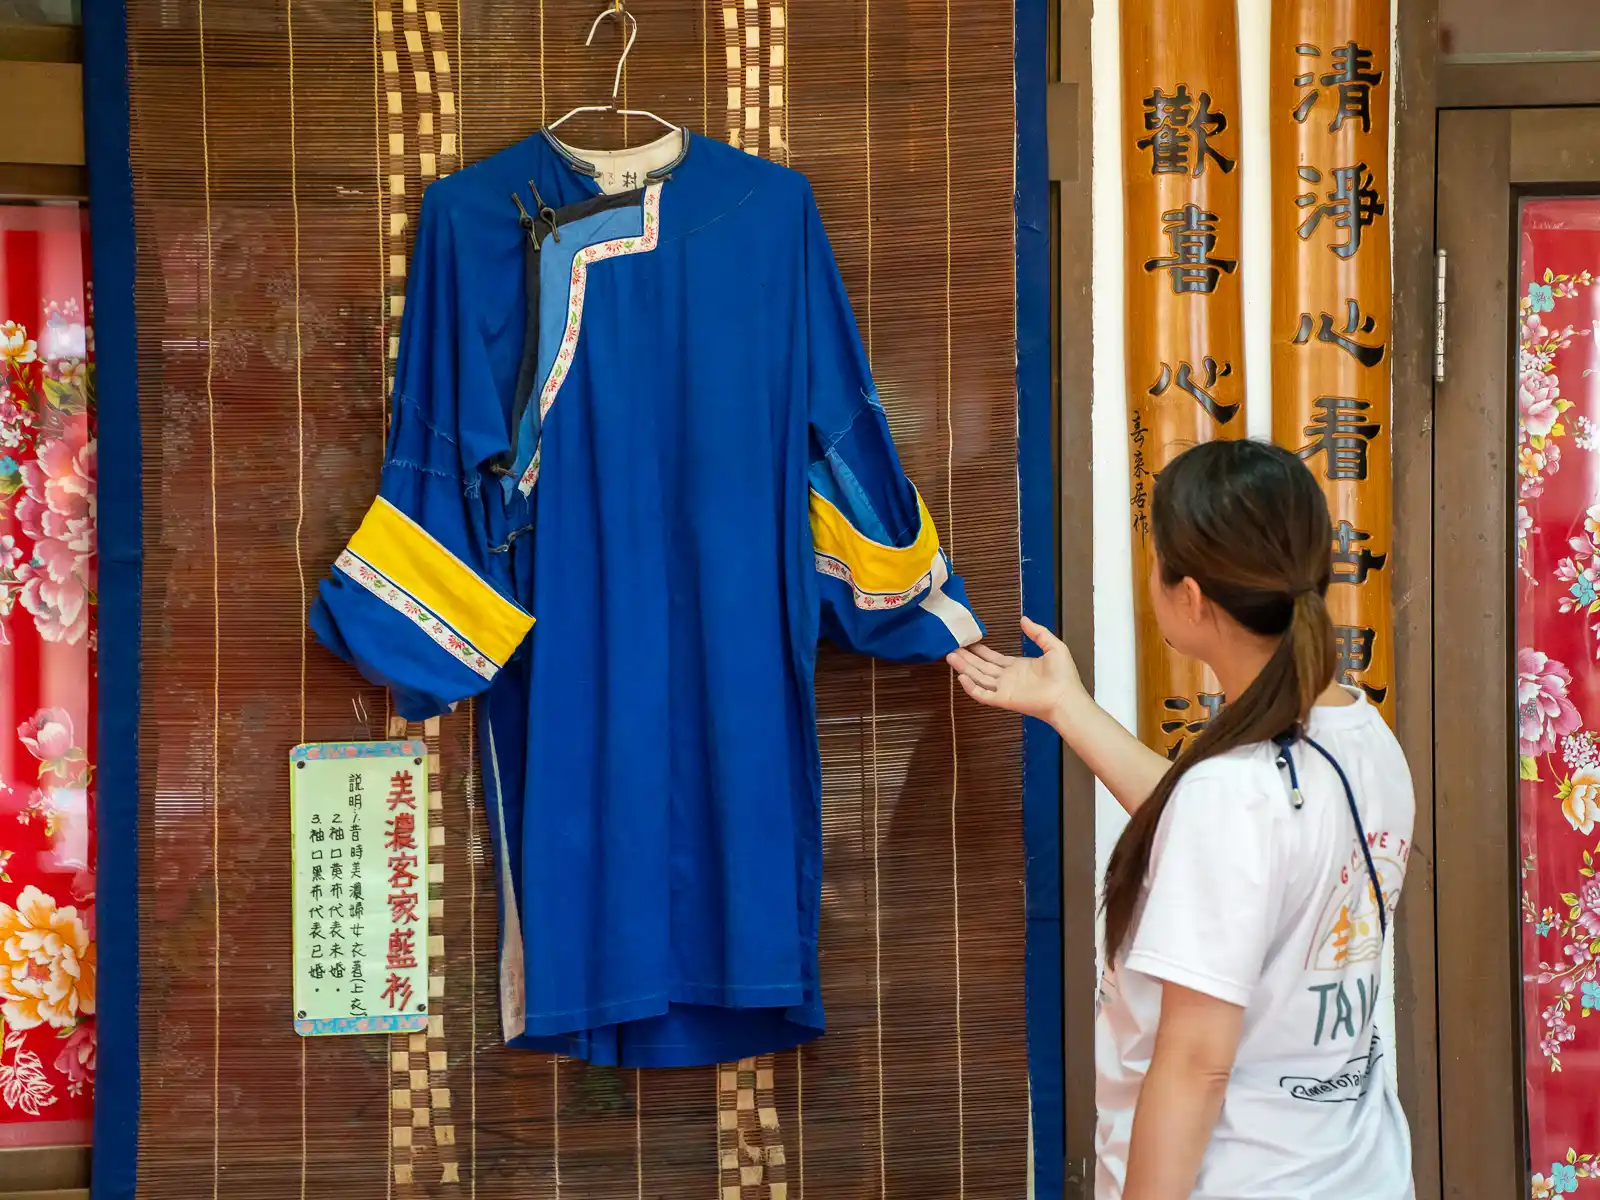 A Hakka blue shirt is displayed hanging on a wall.